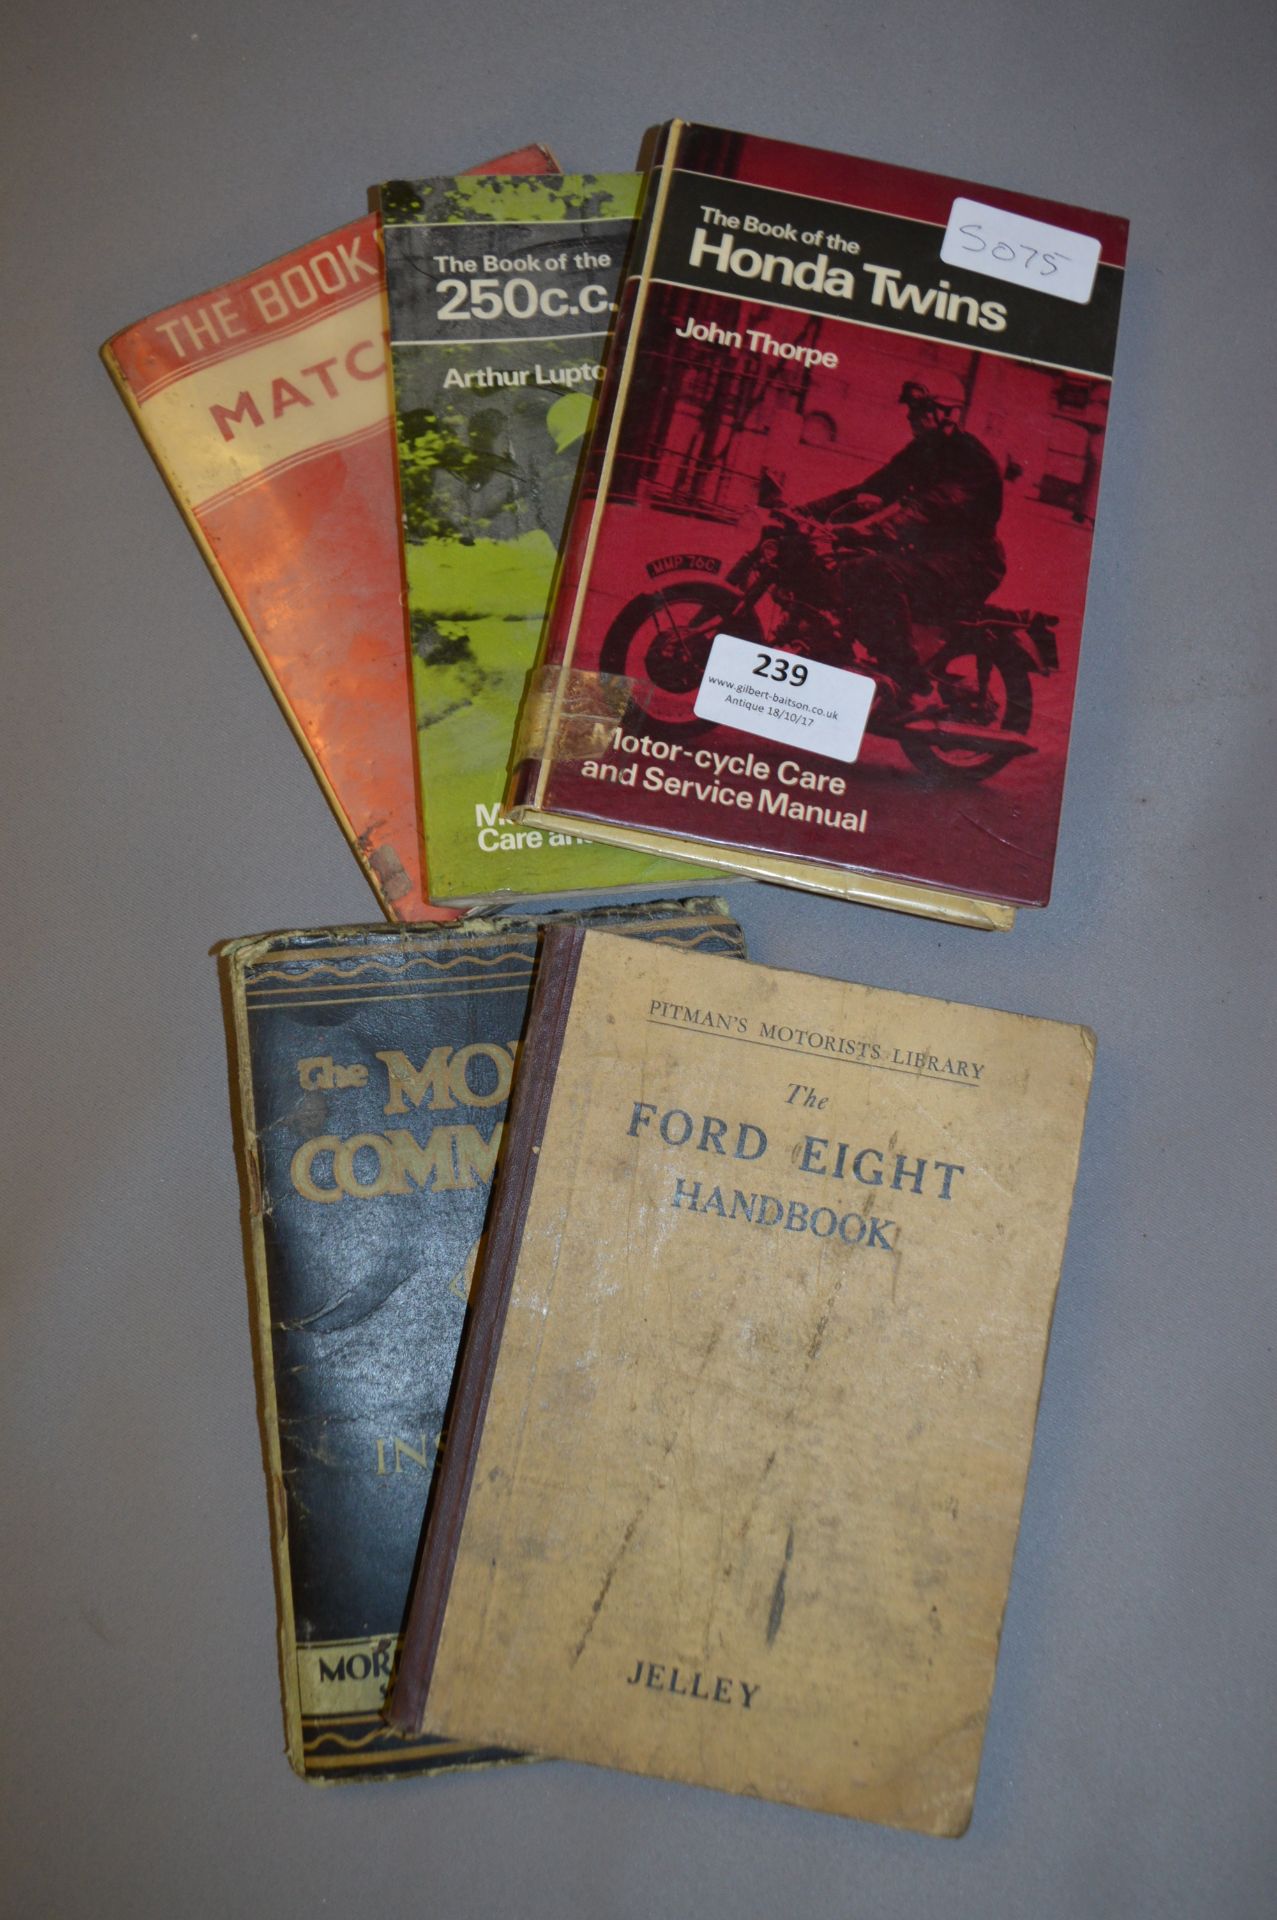 3 Motor Cycle Books including Honda Twins, BSA, Matchless & 2 Vintage Car Books Ford Eight and